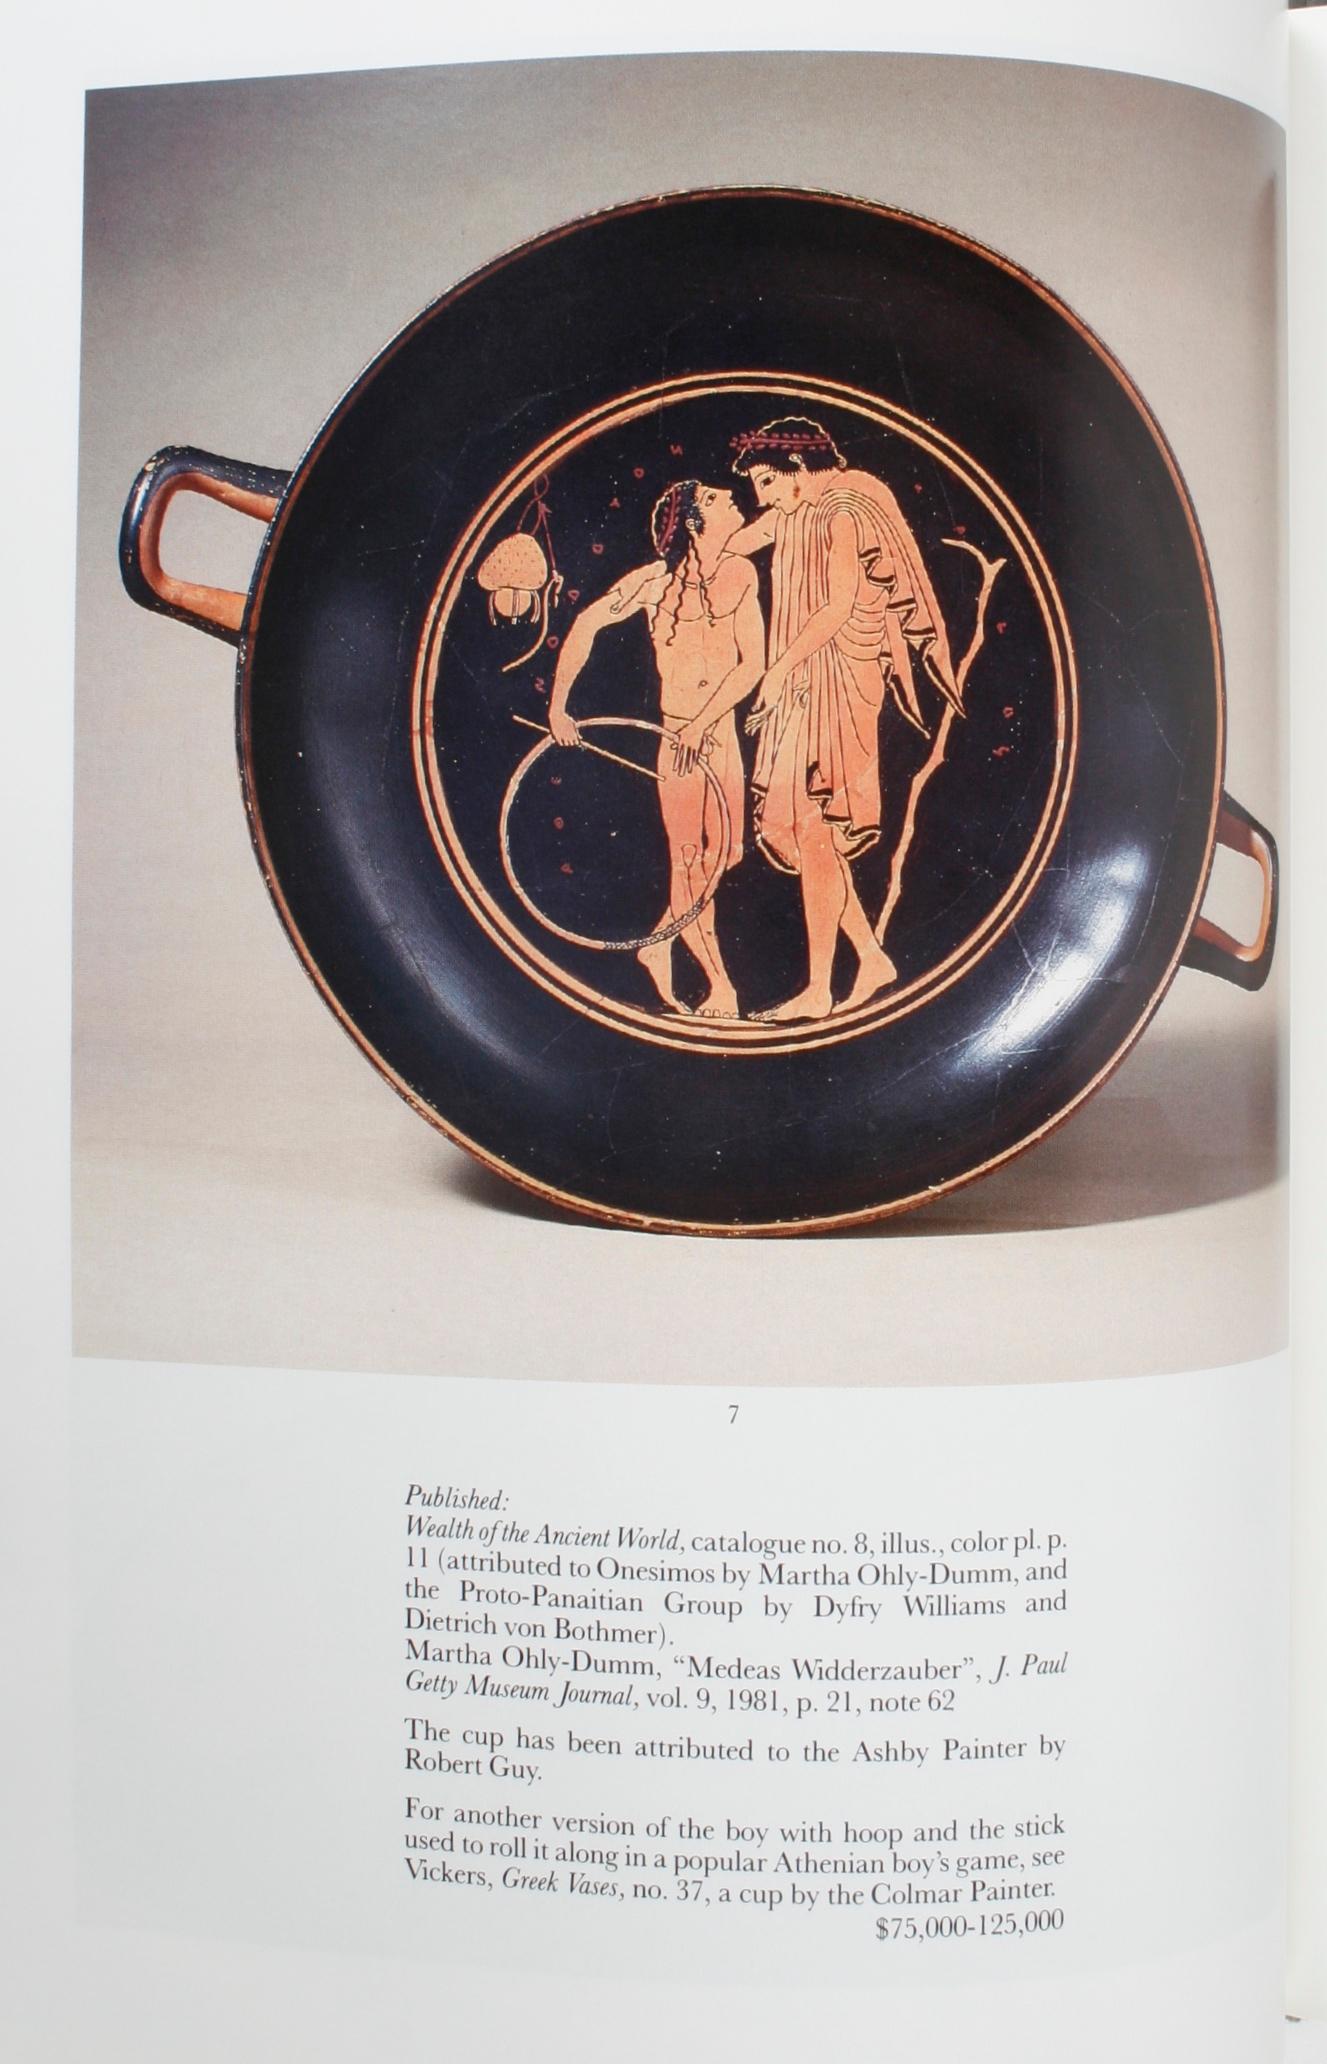 Sotheby's, Hunt Collection Highly Important Greek Vases Roman & Etruscan Bronzes In Excellent Condition For Sale In valatie, NY